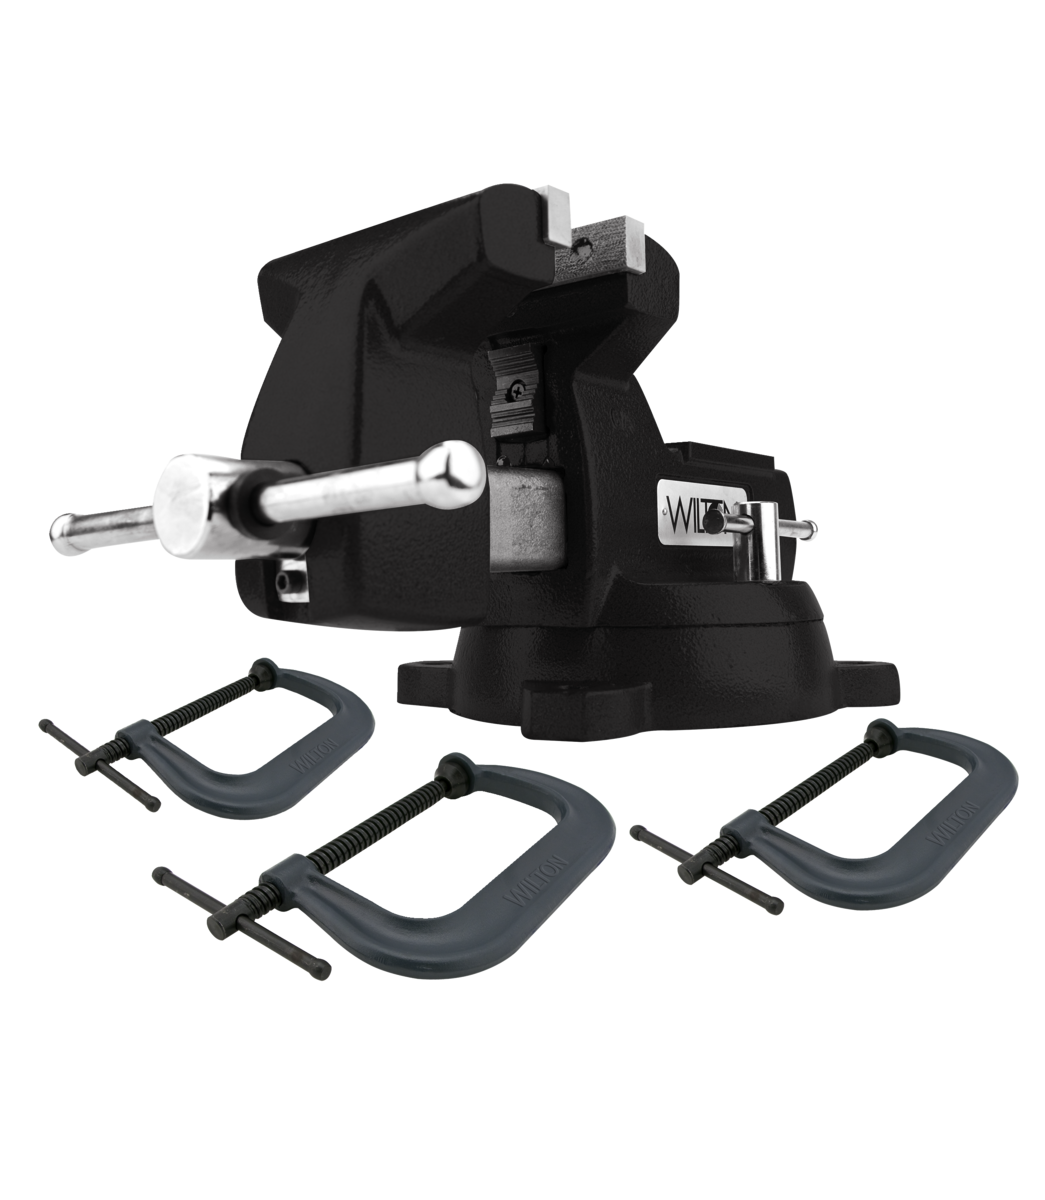 Holding Strong Kit with Black 746 Mechanics Vise and 3 pc. 402/404/406 C-Clamp Set